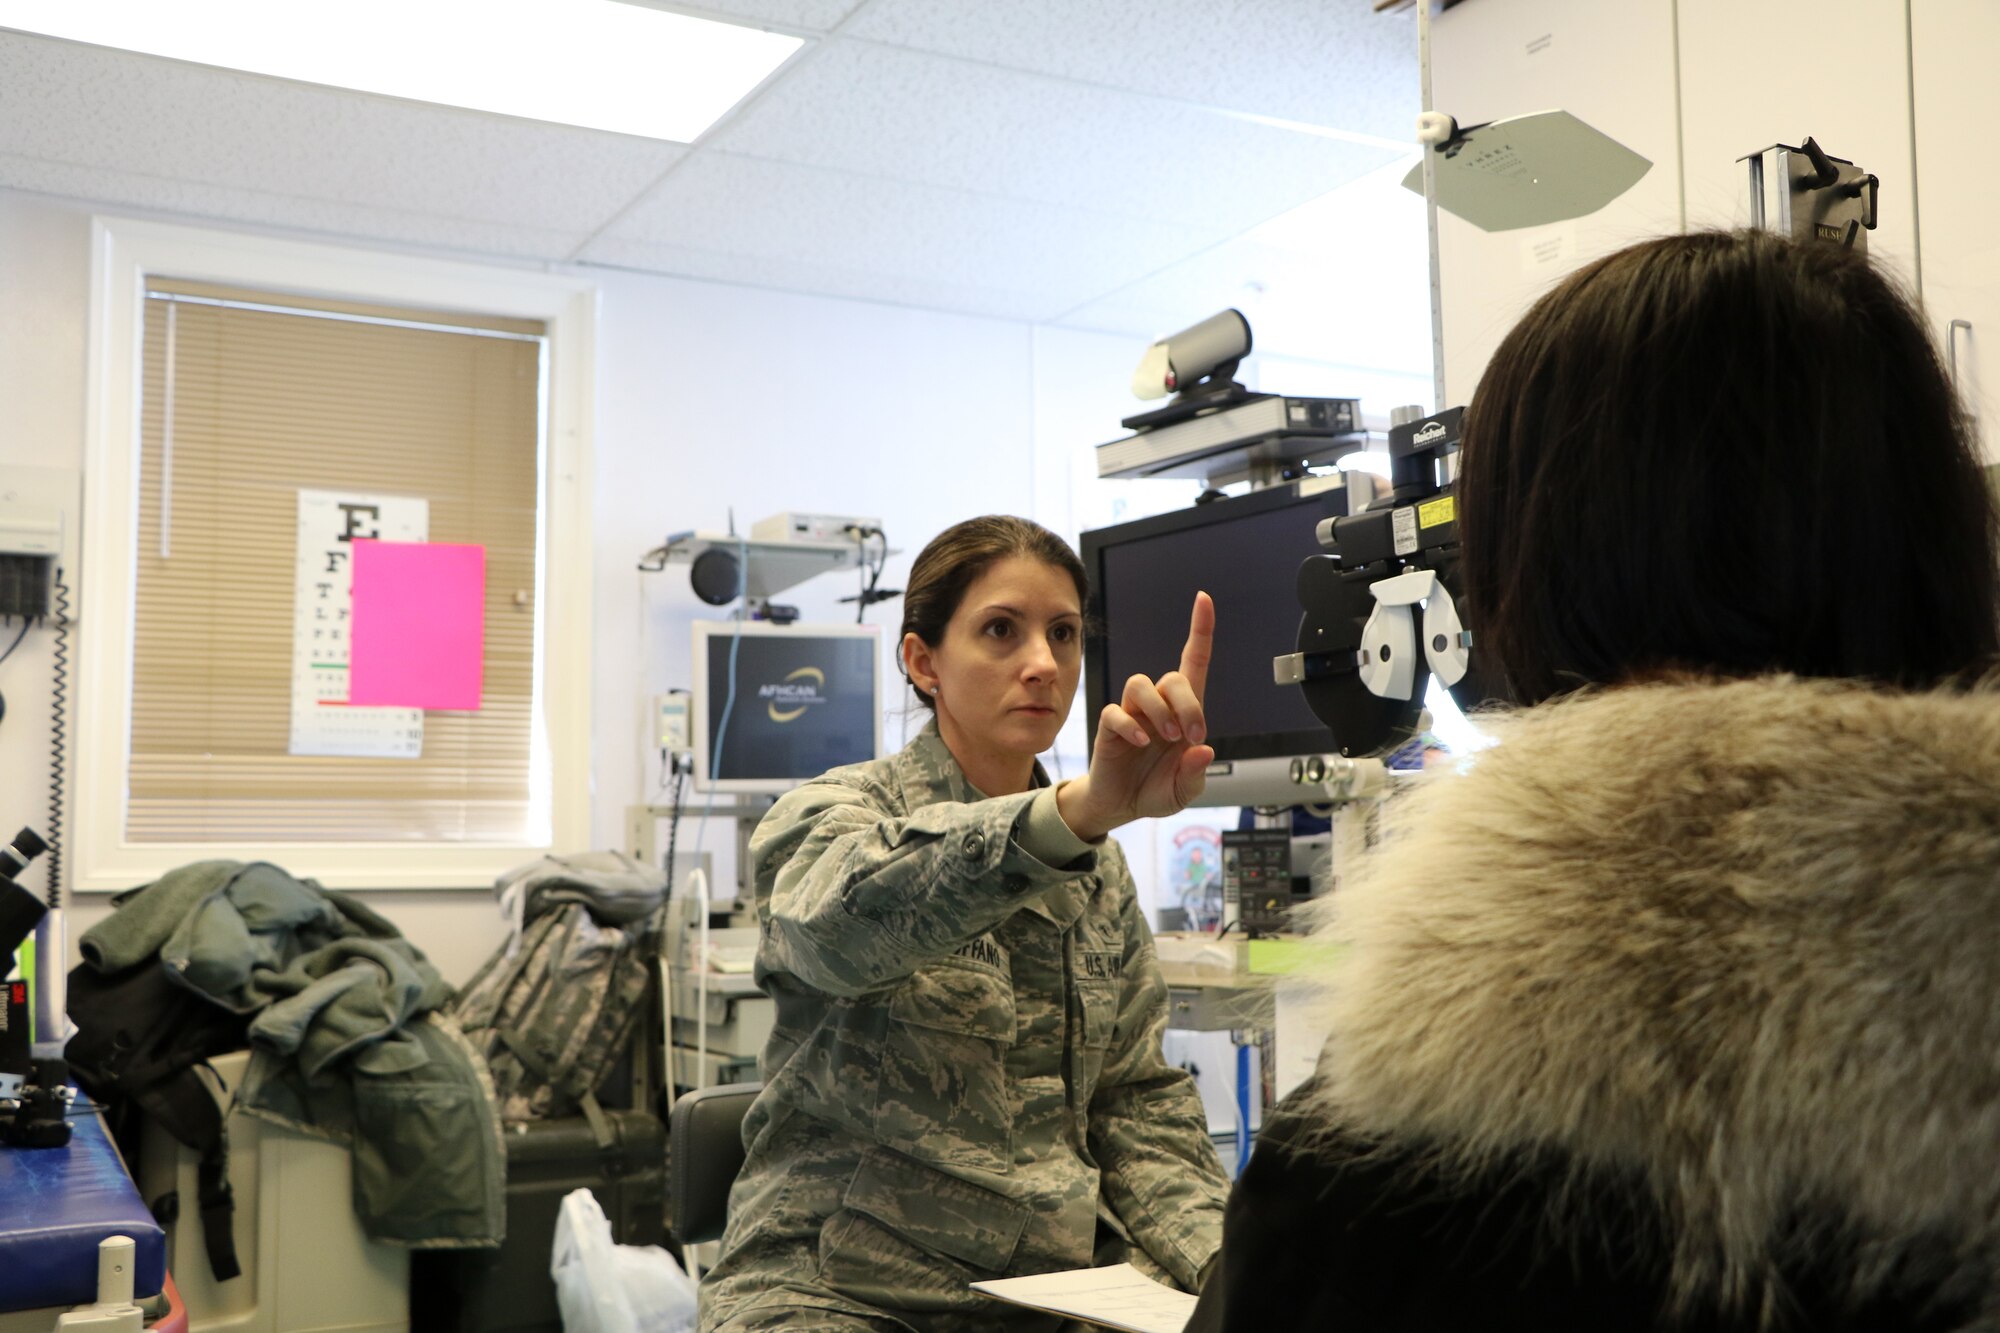 Captain Roxanne Buffano, an optometrist assigned to the 927th Aerospace Medicine Squadron, MacDill AFB FL, conducts an eye exam April 17 in support of Arctic Care 2018, at the Kivalina Clinic, Kivalina, Alaska. Arctic Care 2018 is an Innovative Readiness Training exercise comprised of a joint and multi-national force providing medical, dental, optometry and veterinary care for underserved villages in the Maniillaq Service Area April 16-24. (U.S. Air Force photo by Maj. Joe Simms)